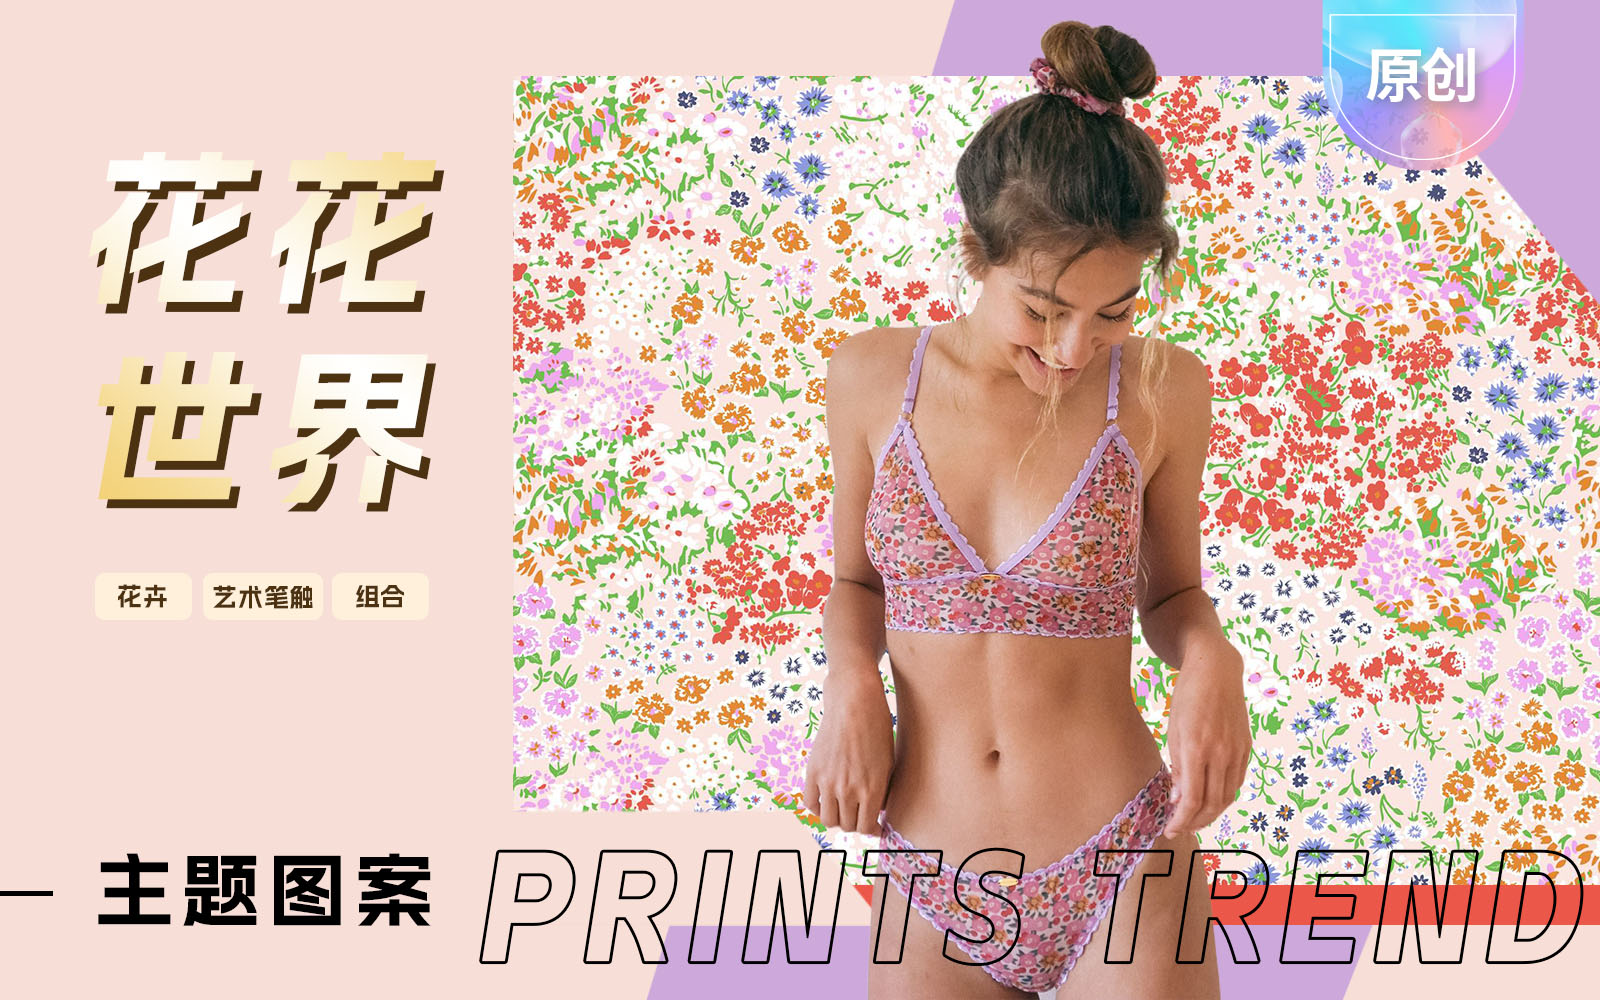 Floral World -- The Pattern Trend for Women's Briefs